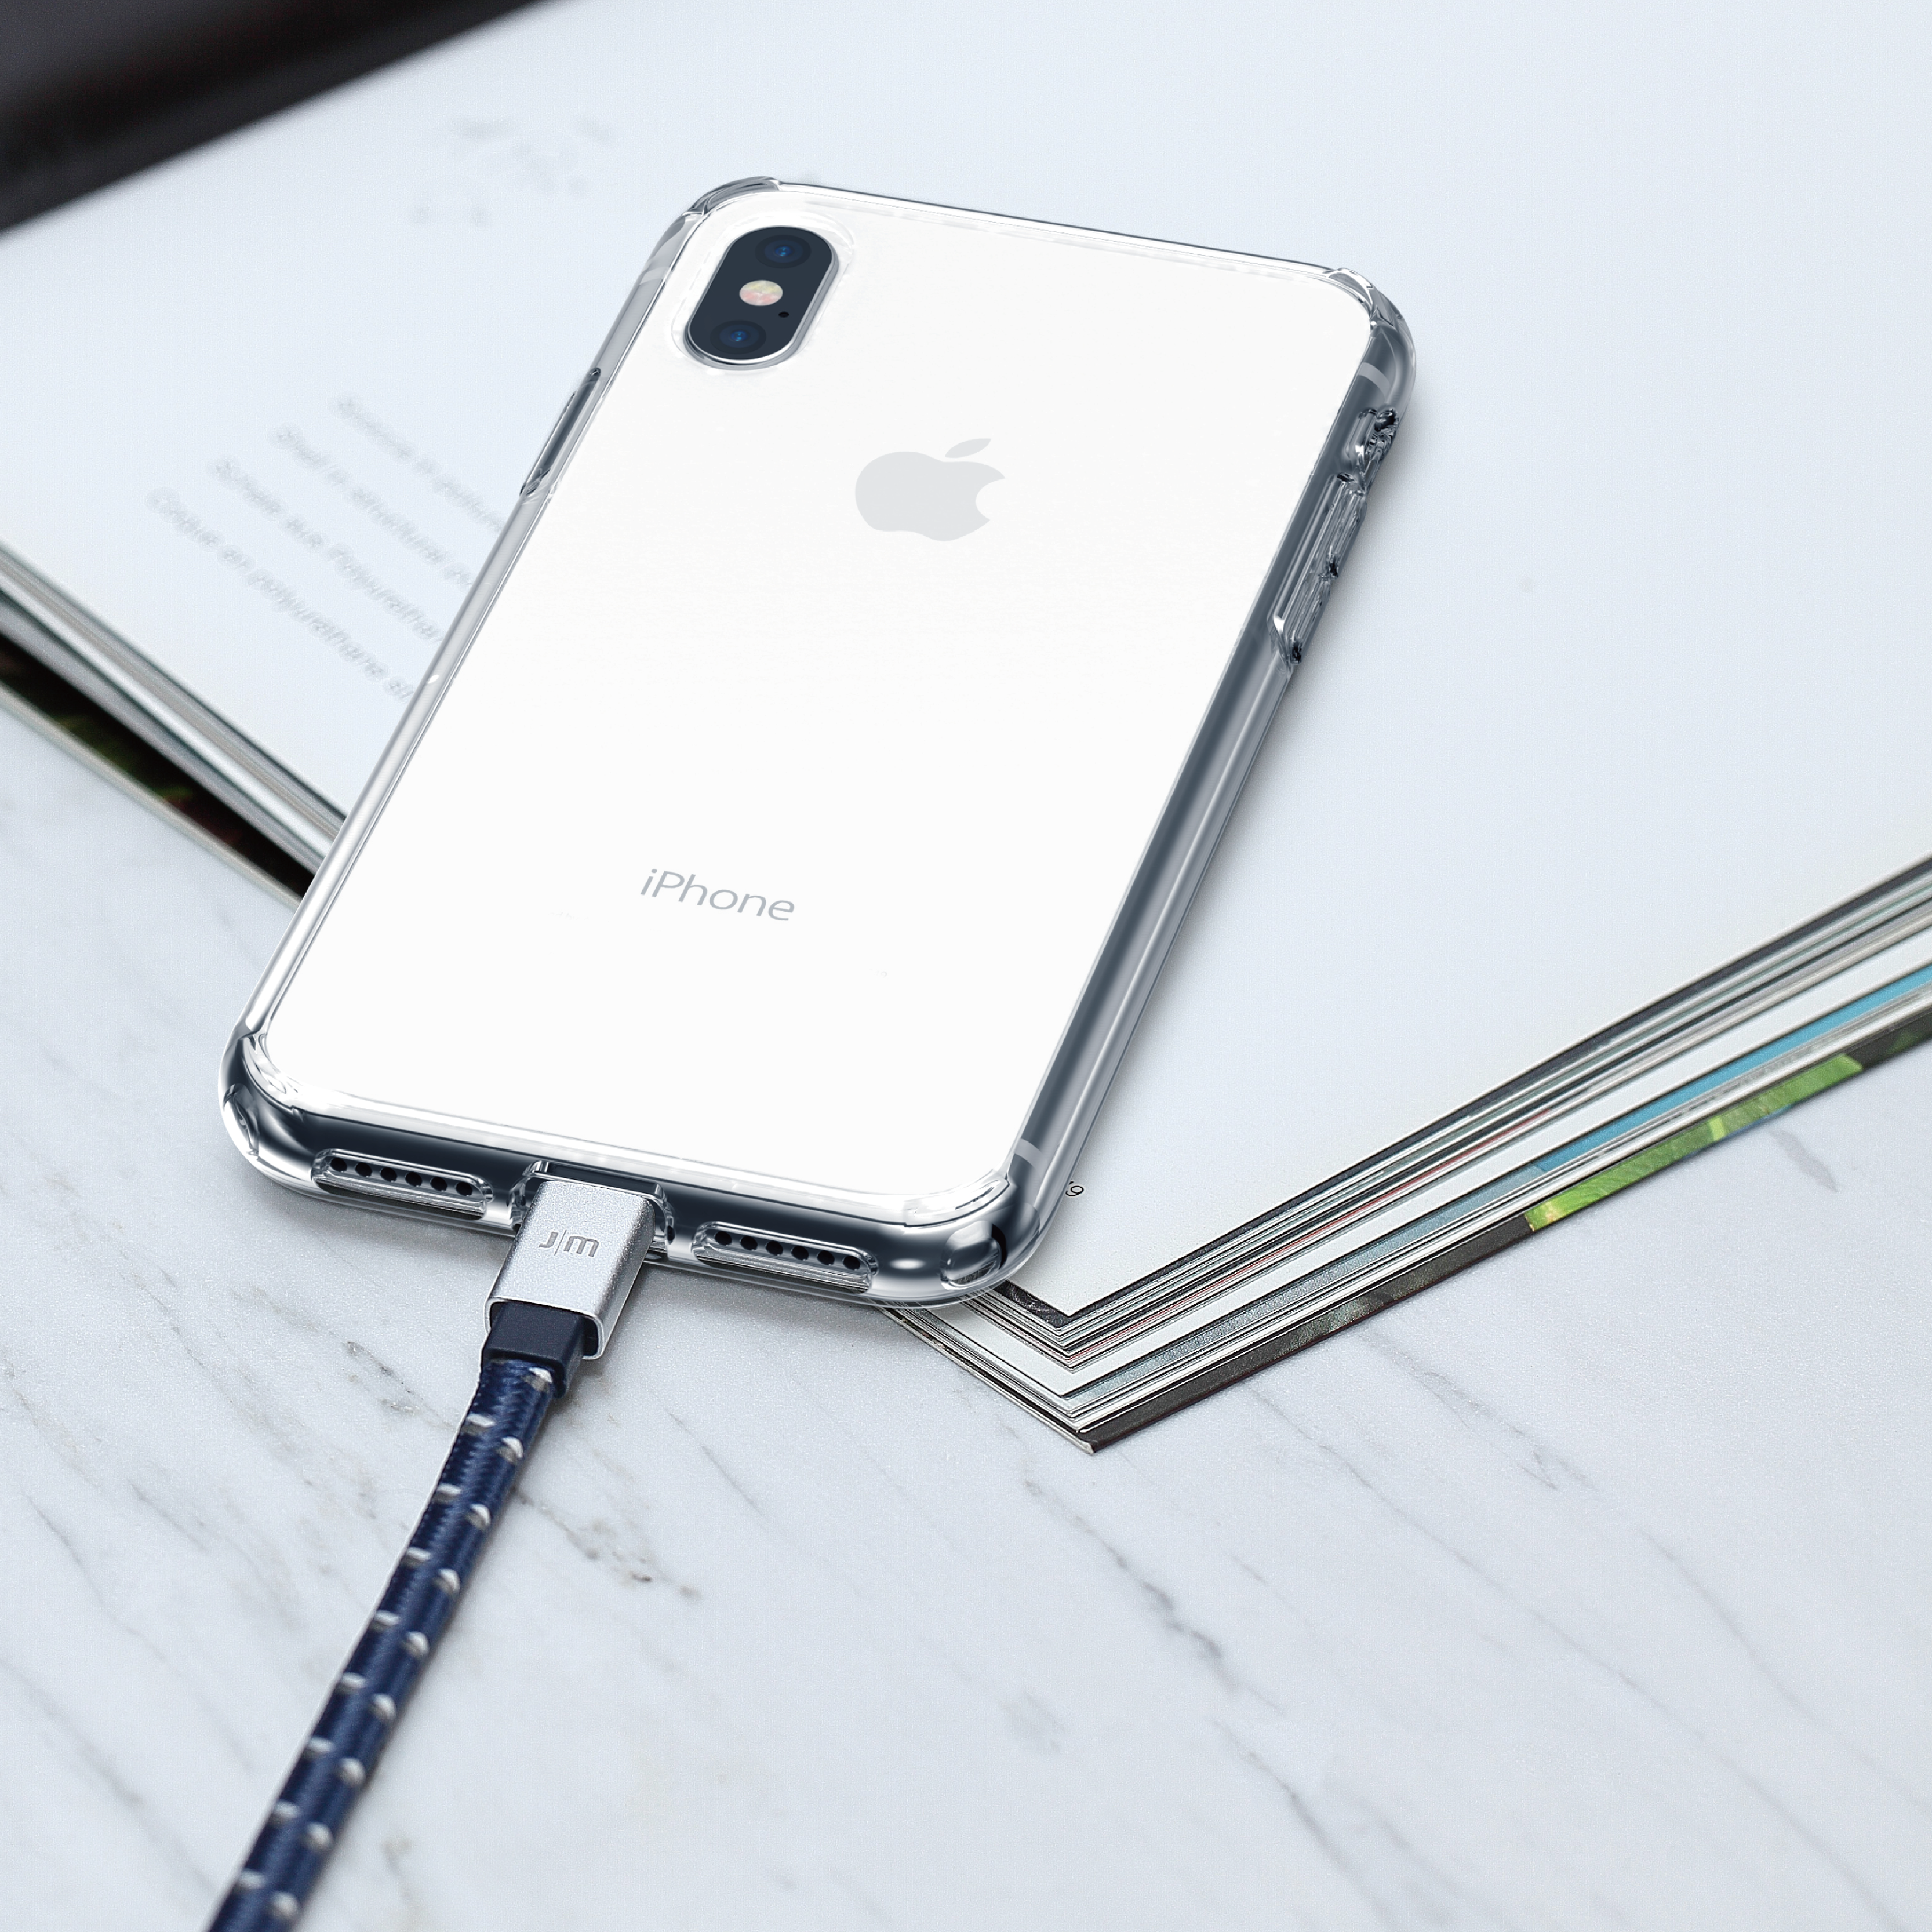 TENC Air - The most advanced composite slim bumper clear case with air cushions for the iPhone XS Max/XS/X - Just Mobile in Malaysia - Storming Gravity